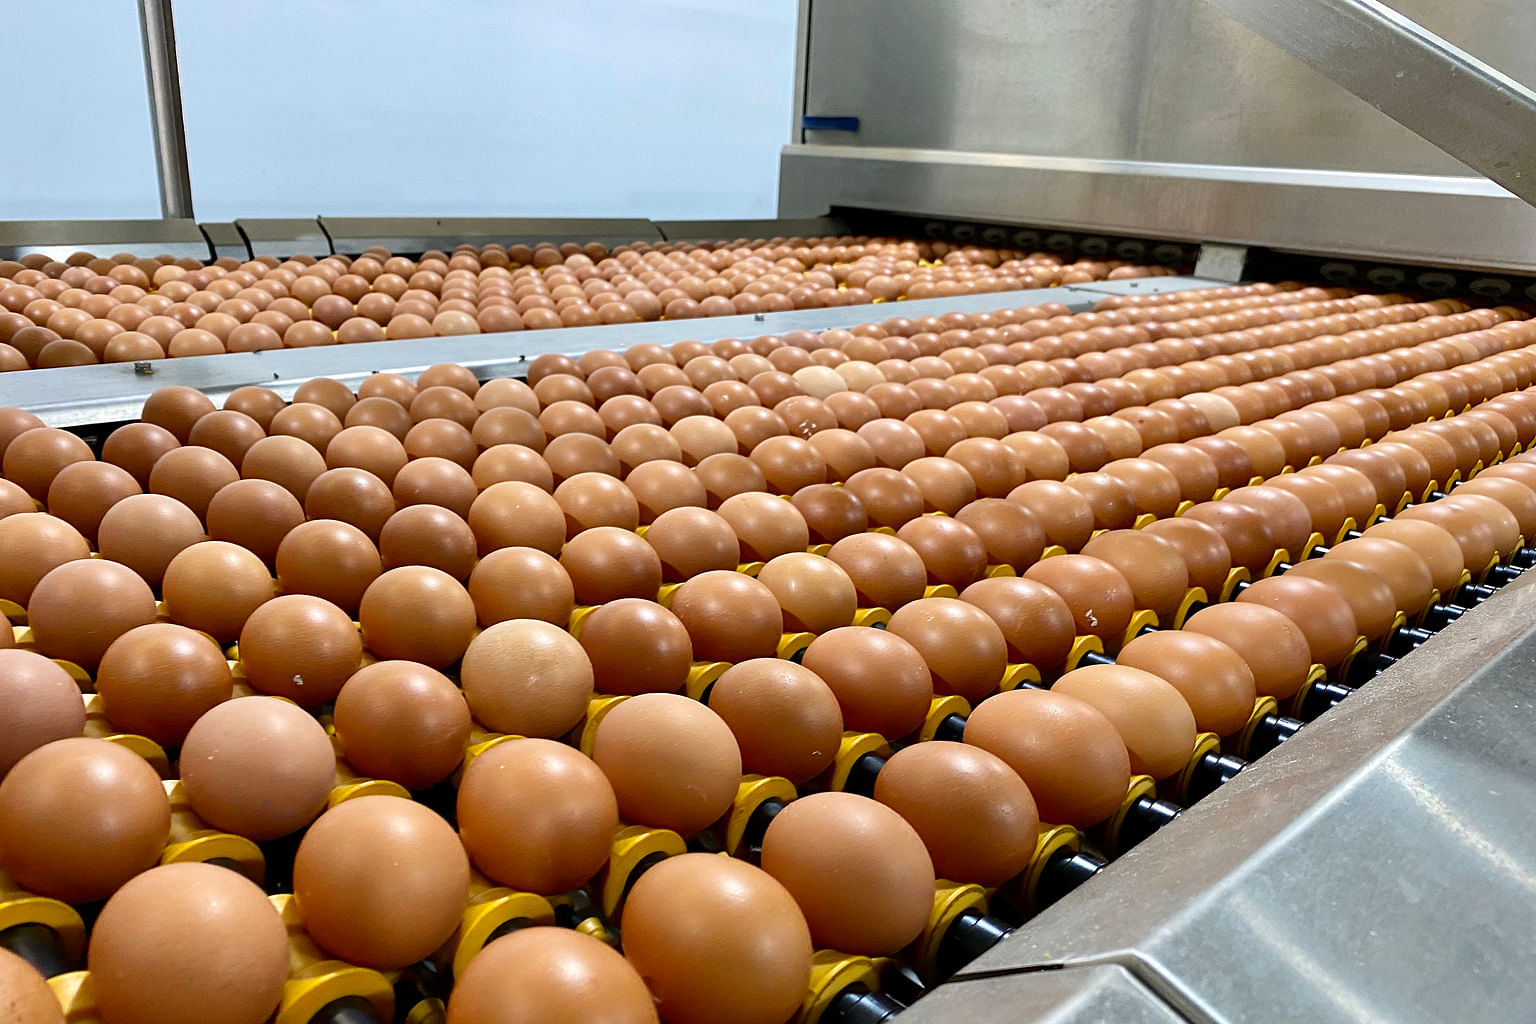 Chew’s Agriculture will boost output at its new farm in Neo Tiew Road, which has the capacity to produce at least 800,000 eggs a day.